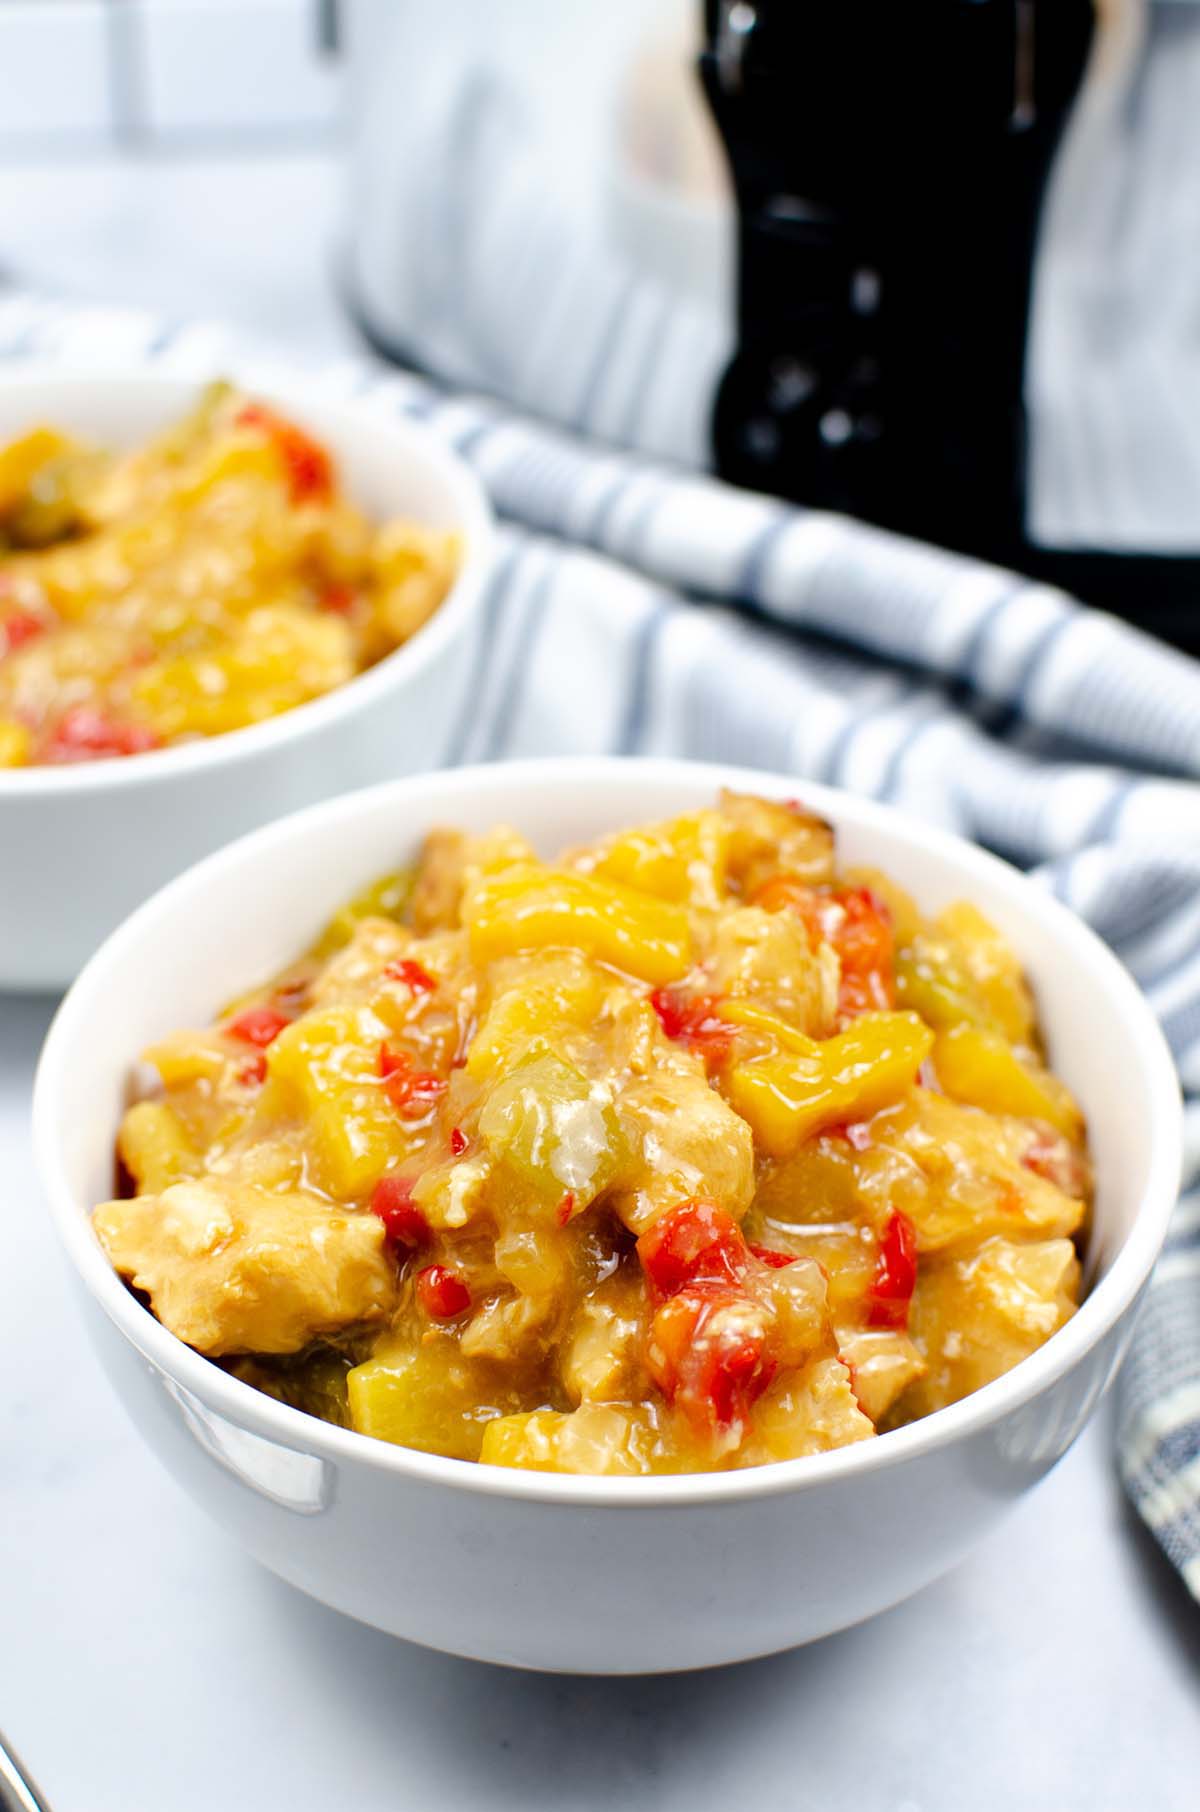 Two bowls of sweet and sour chicken.